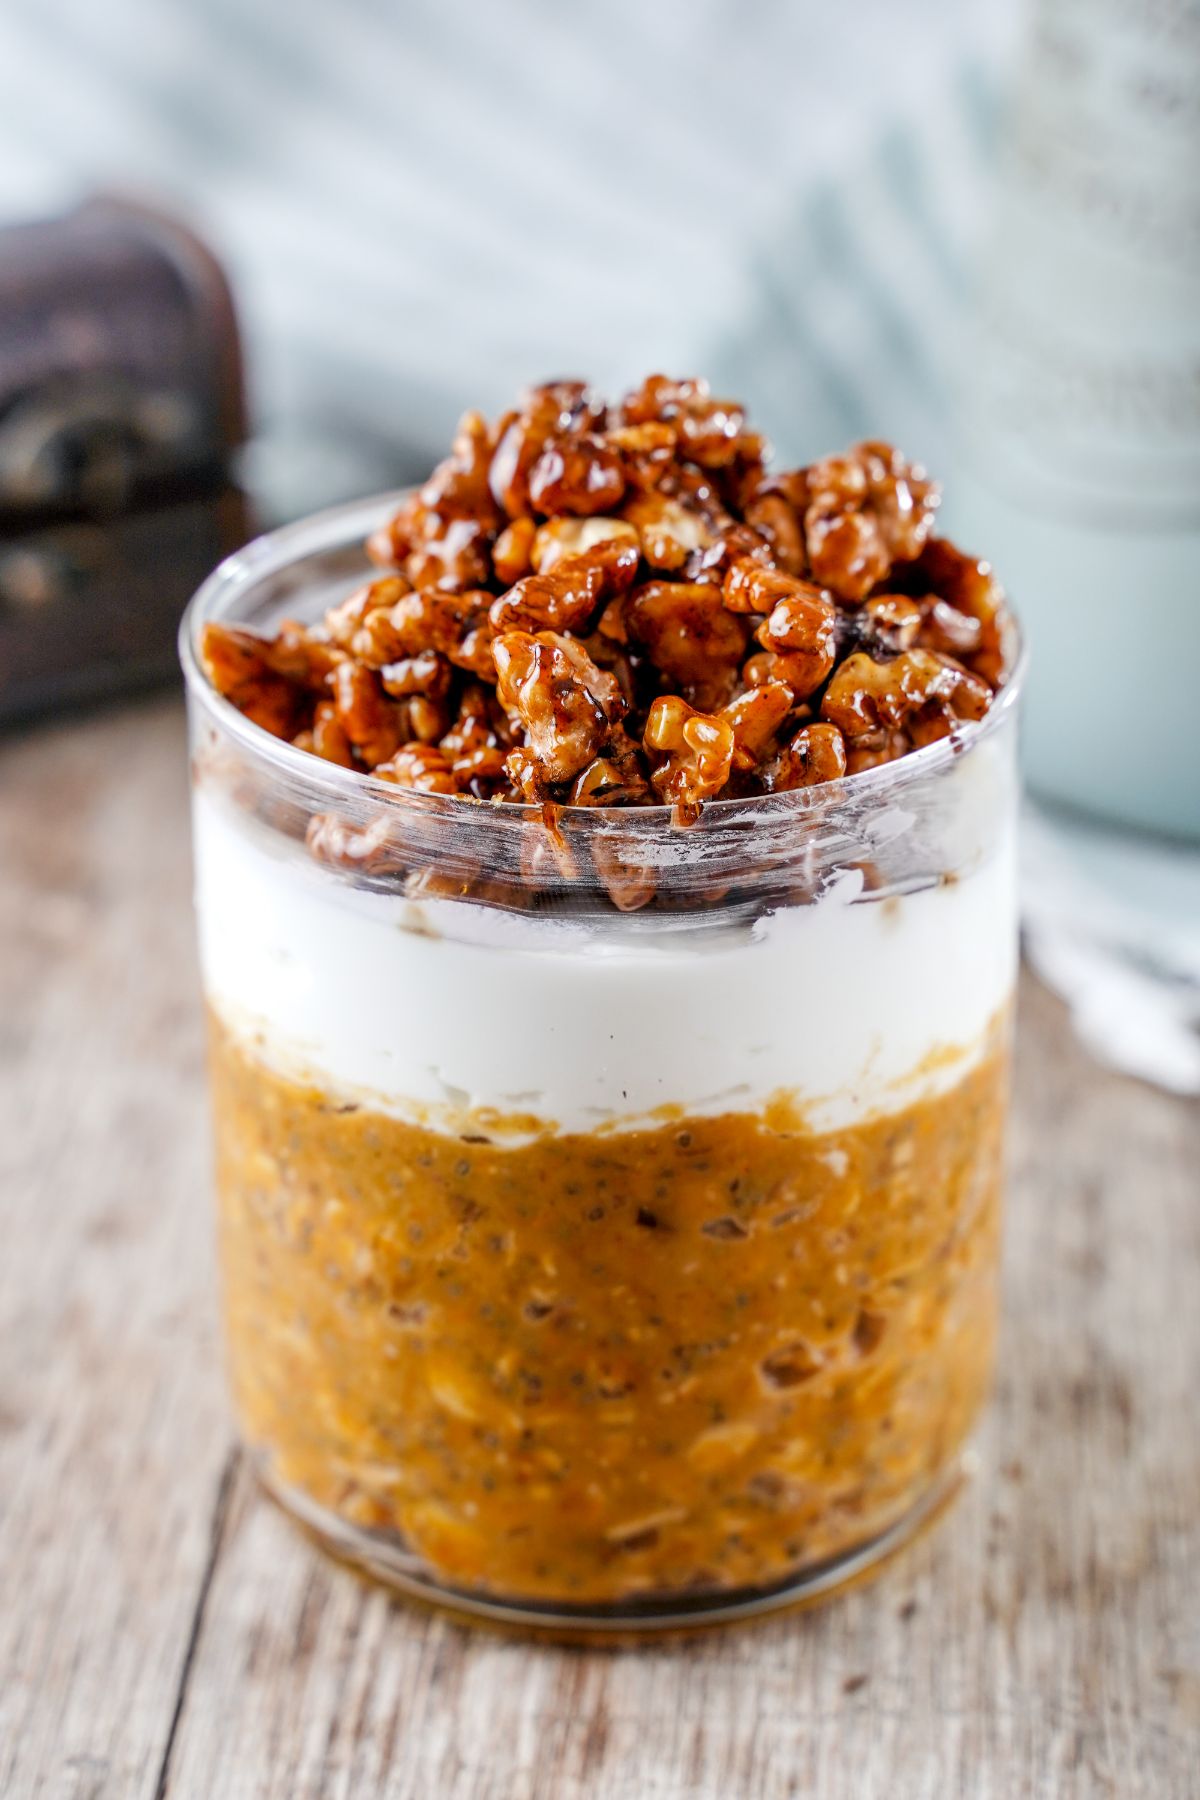 Zoom in side view image of Pumpkin Pie Overnight Oats in a glass 